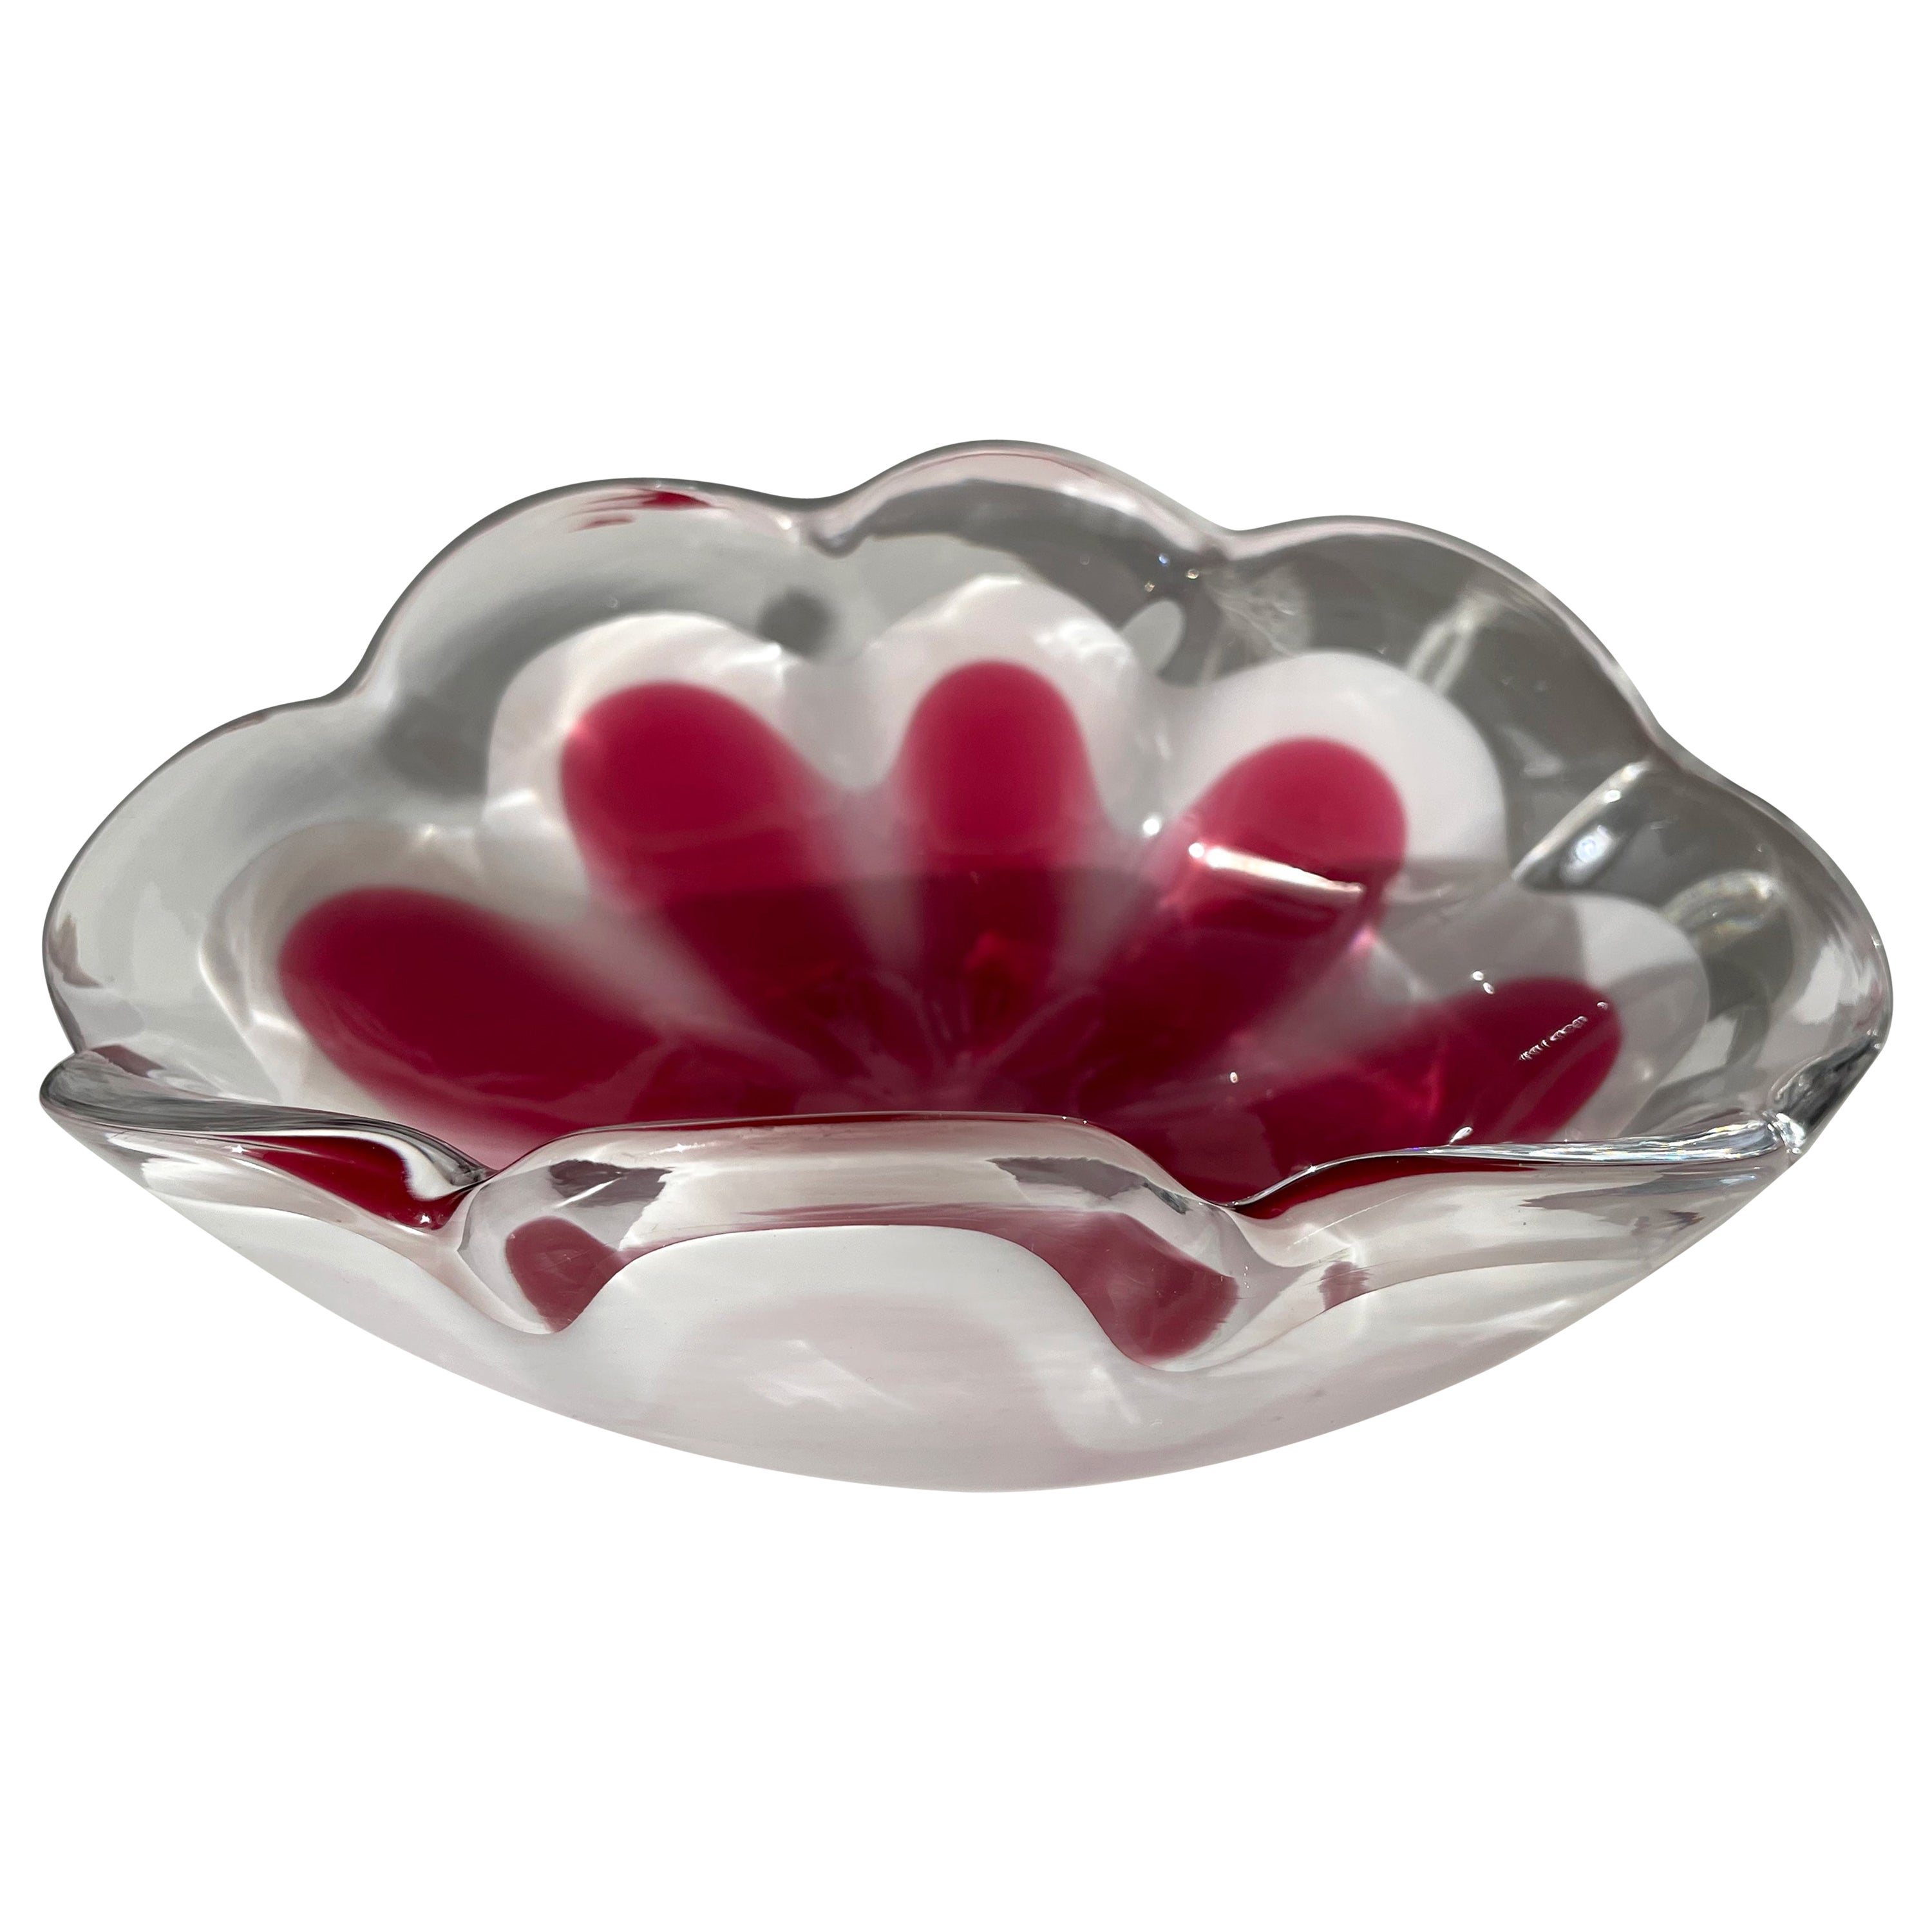 Kedelv for Flygsfors Pink, White Coquille Art Glass Bowl, 1959